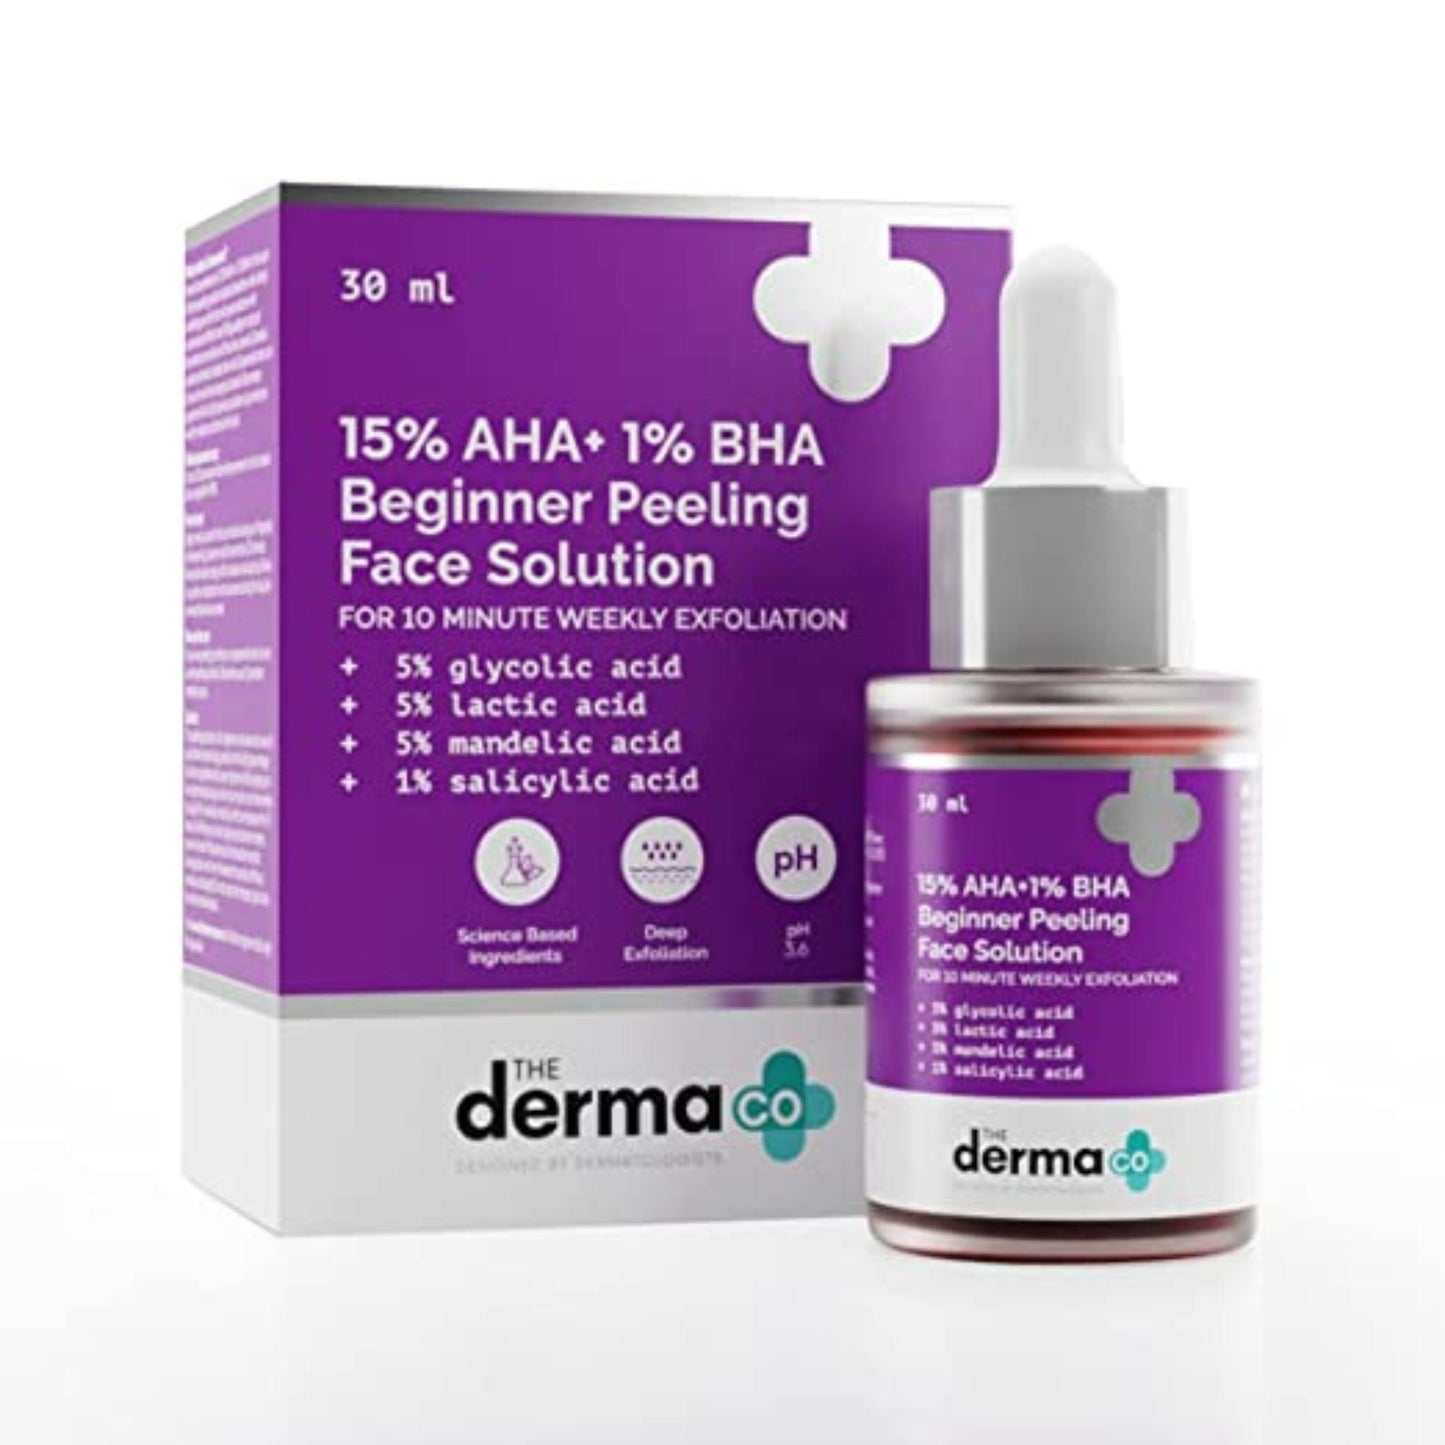 The Derma Co 15% AHA + 1% BHA Beginner Face Peeling Solution for 10-Minute Weekly Exfoliation - 30ml(dermaco)